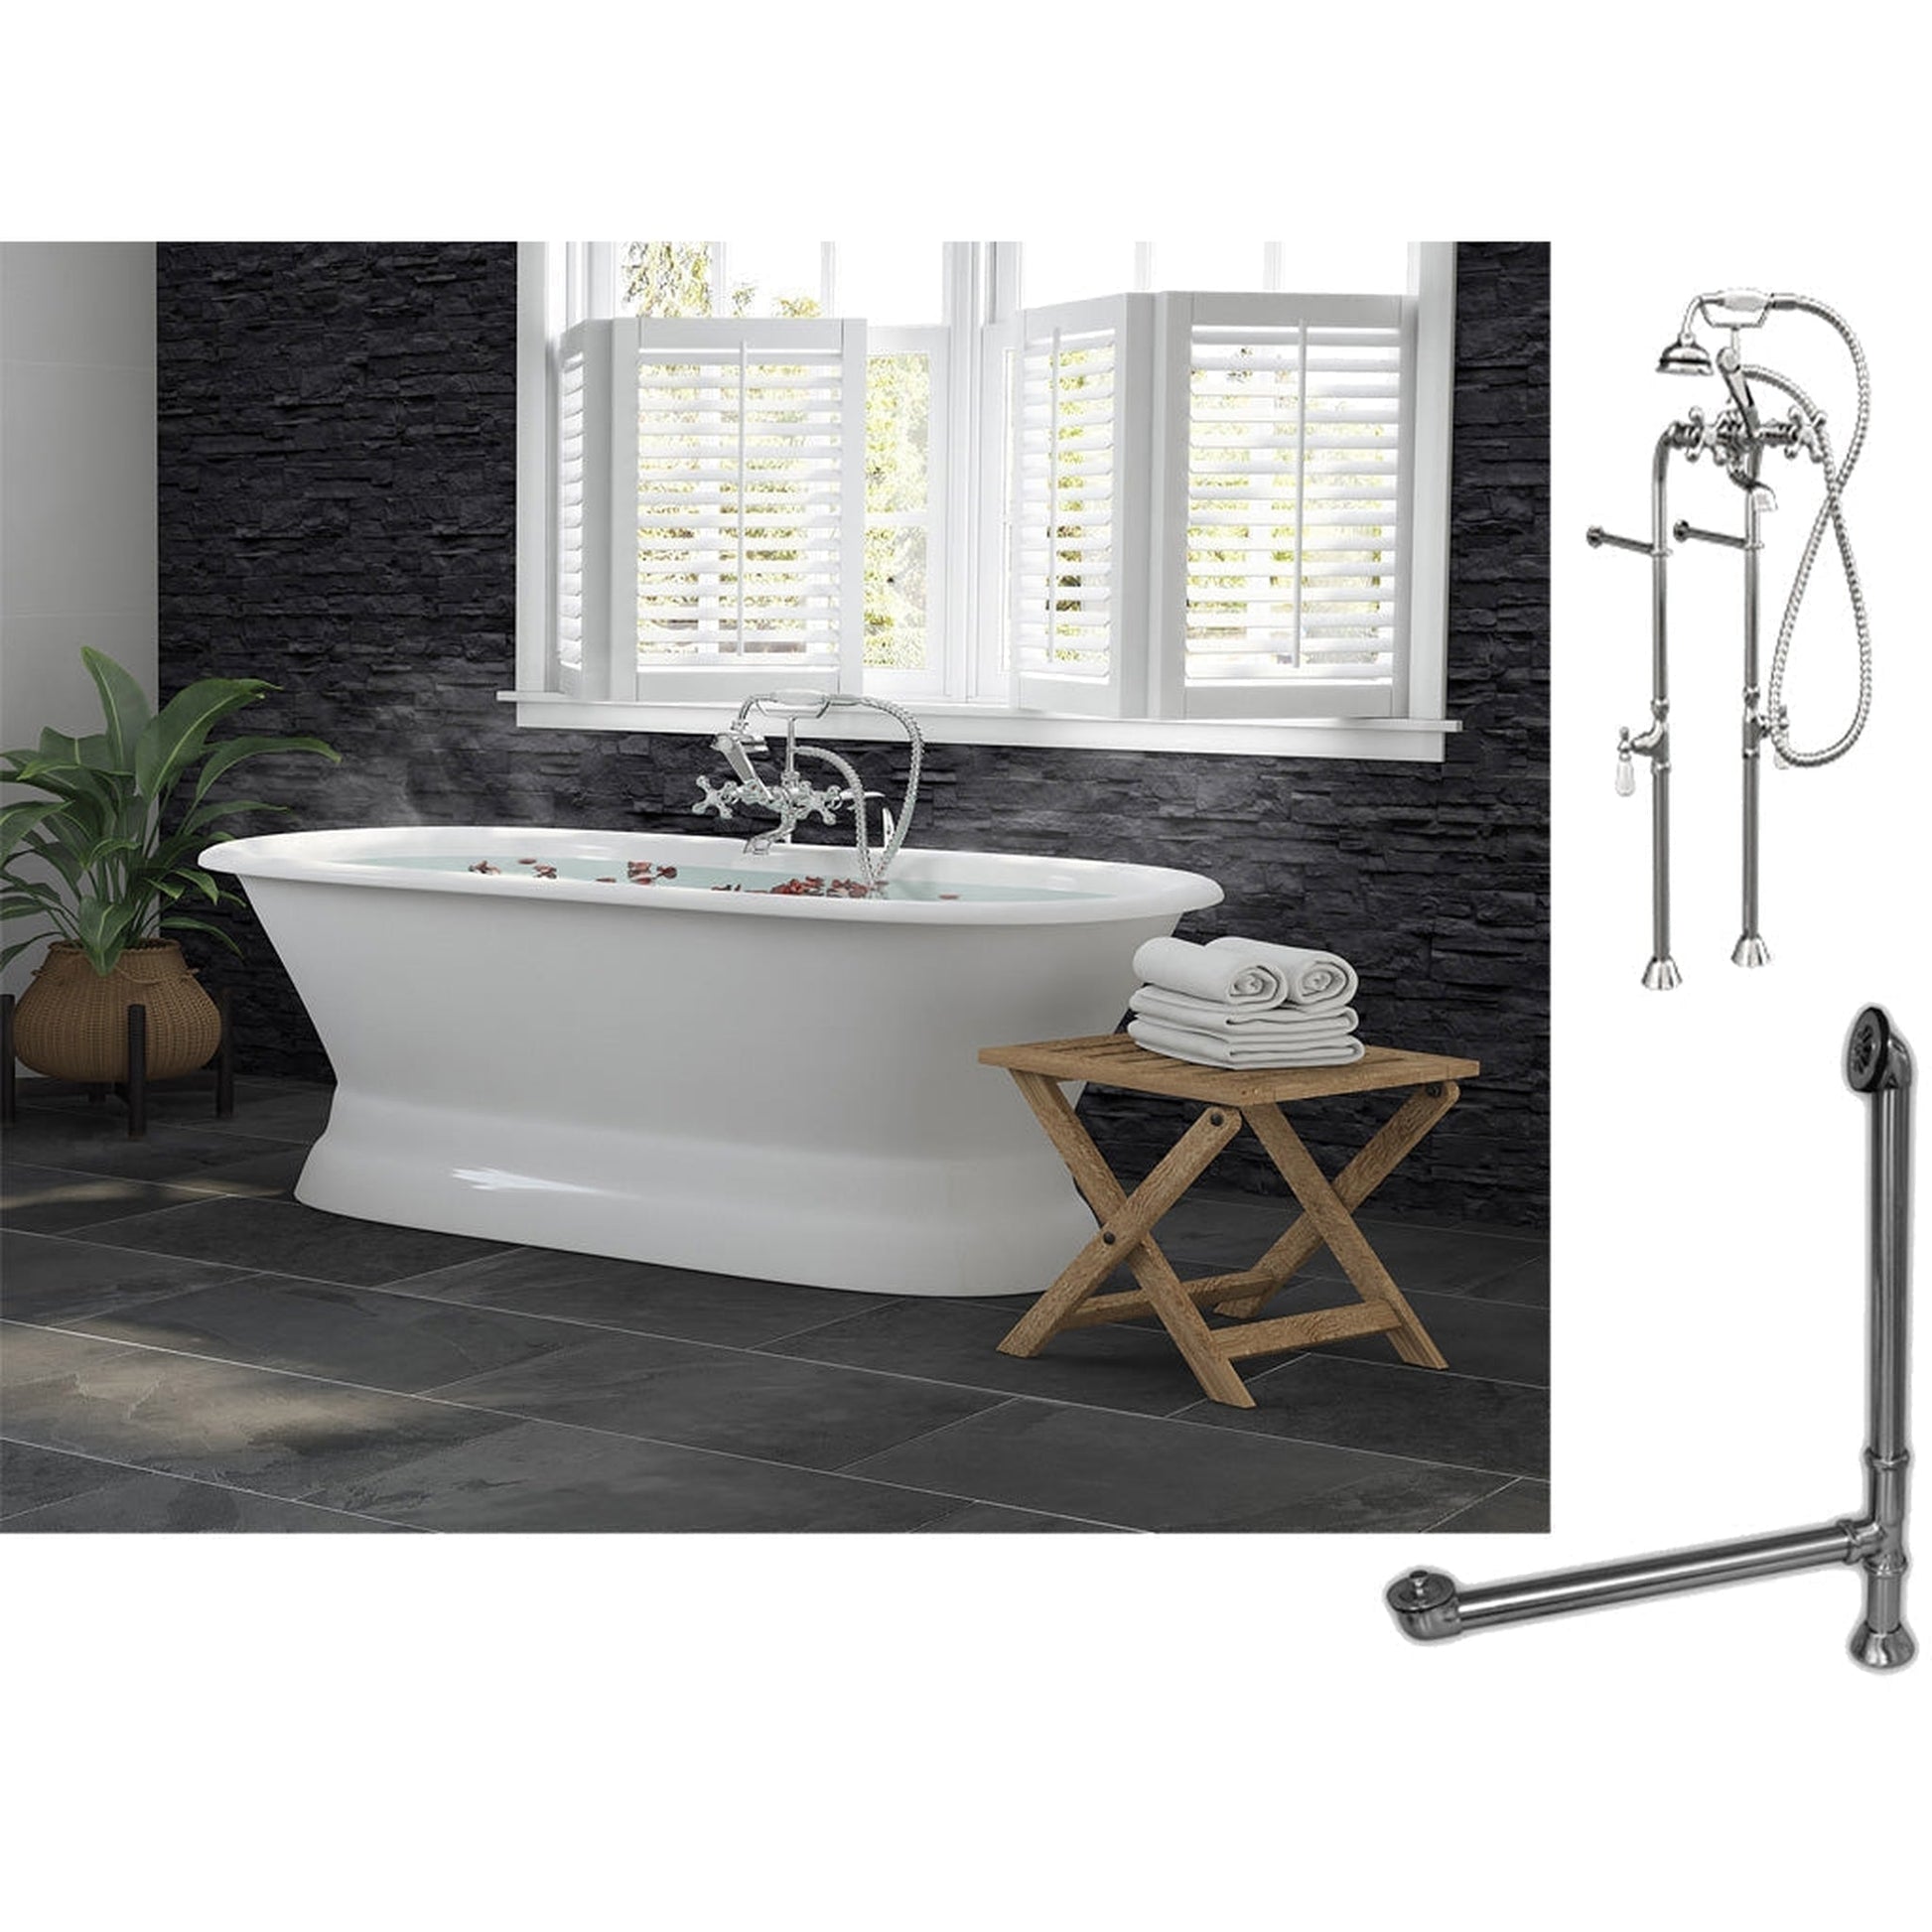 Cambridge Plumbing 60" White Cast Iron Double Ended Pedestal Bathtub With No Deck Holes And Complete Plumbing Package Including Floor Mounted British Telephone Faucet, Drain And Overflow Assembly In Polished Chrome